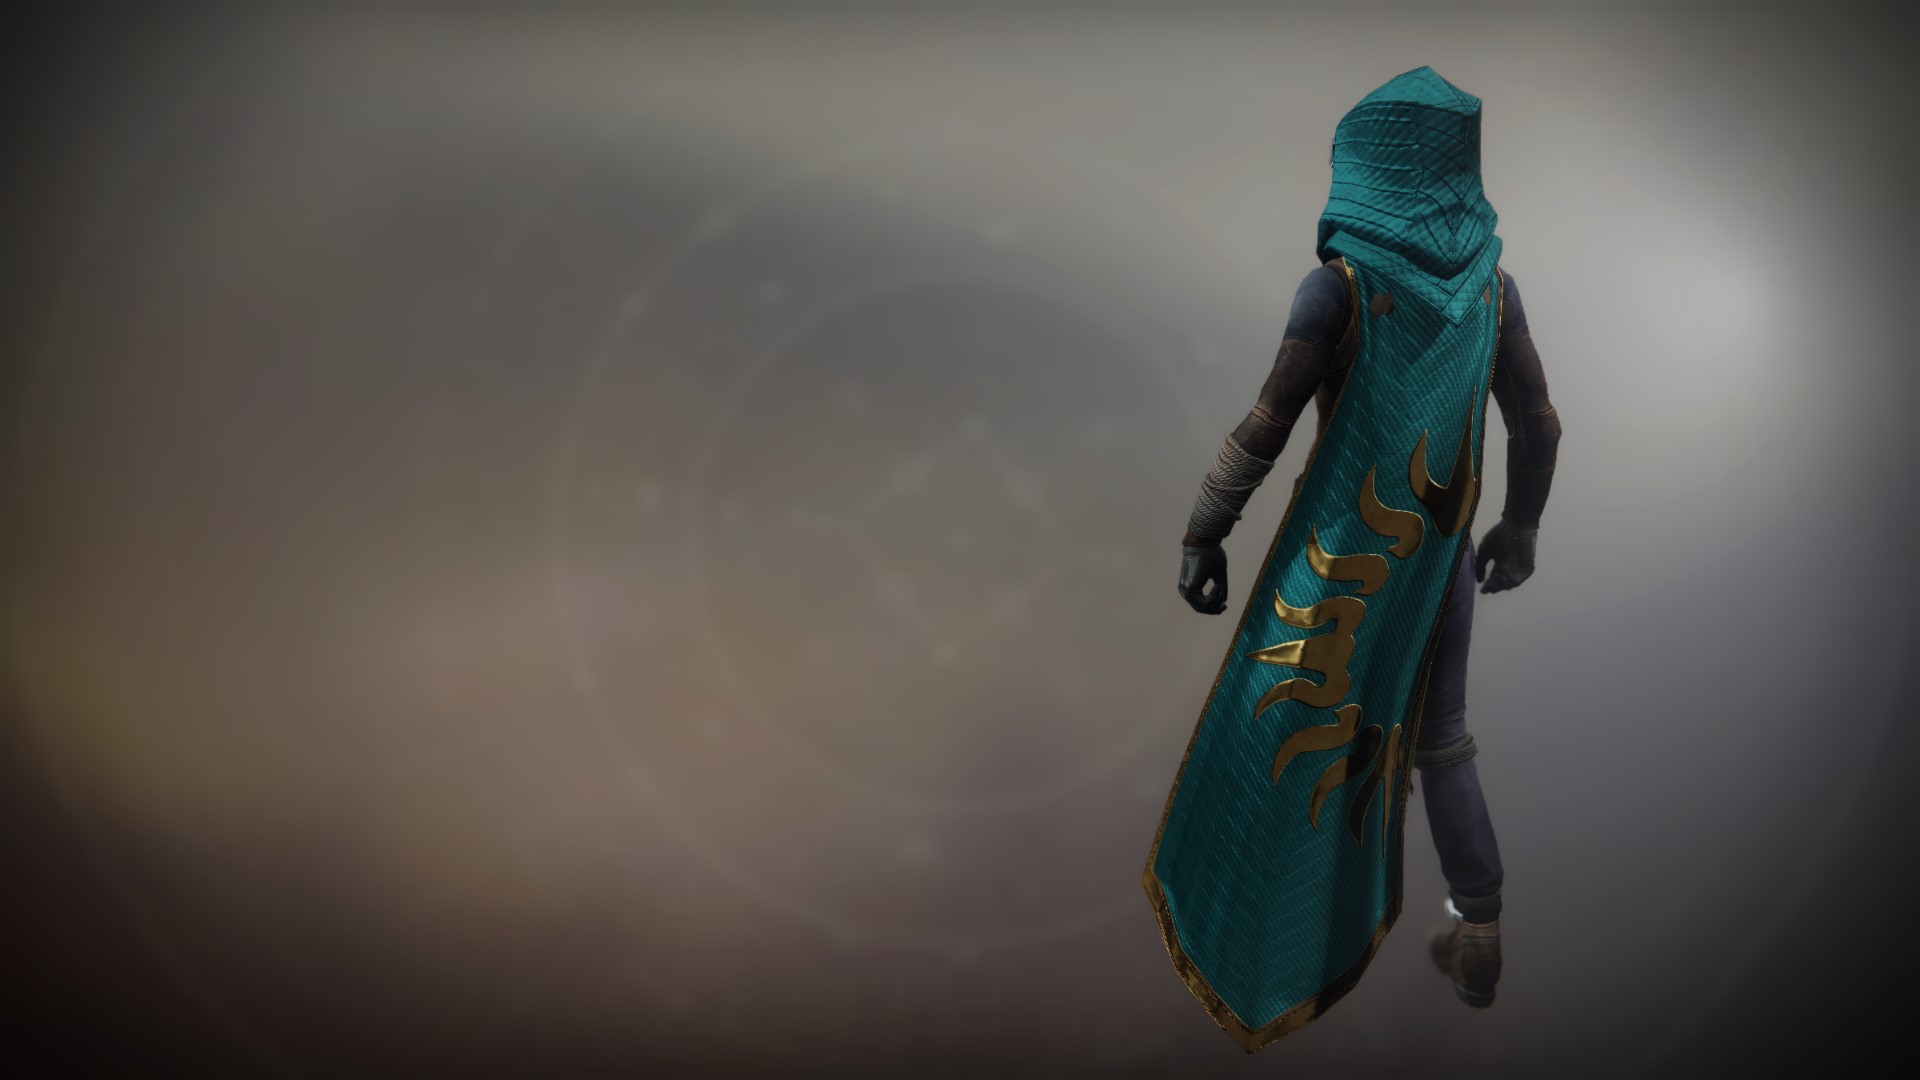 An in-game render of the Cloak of the Exile.